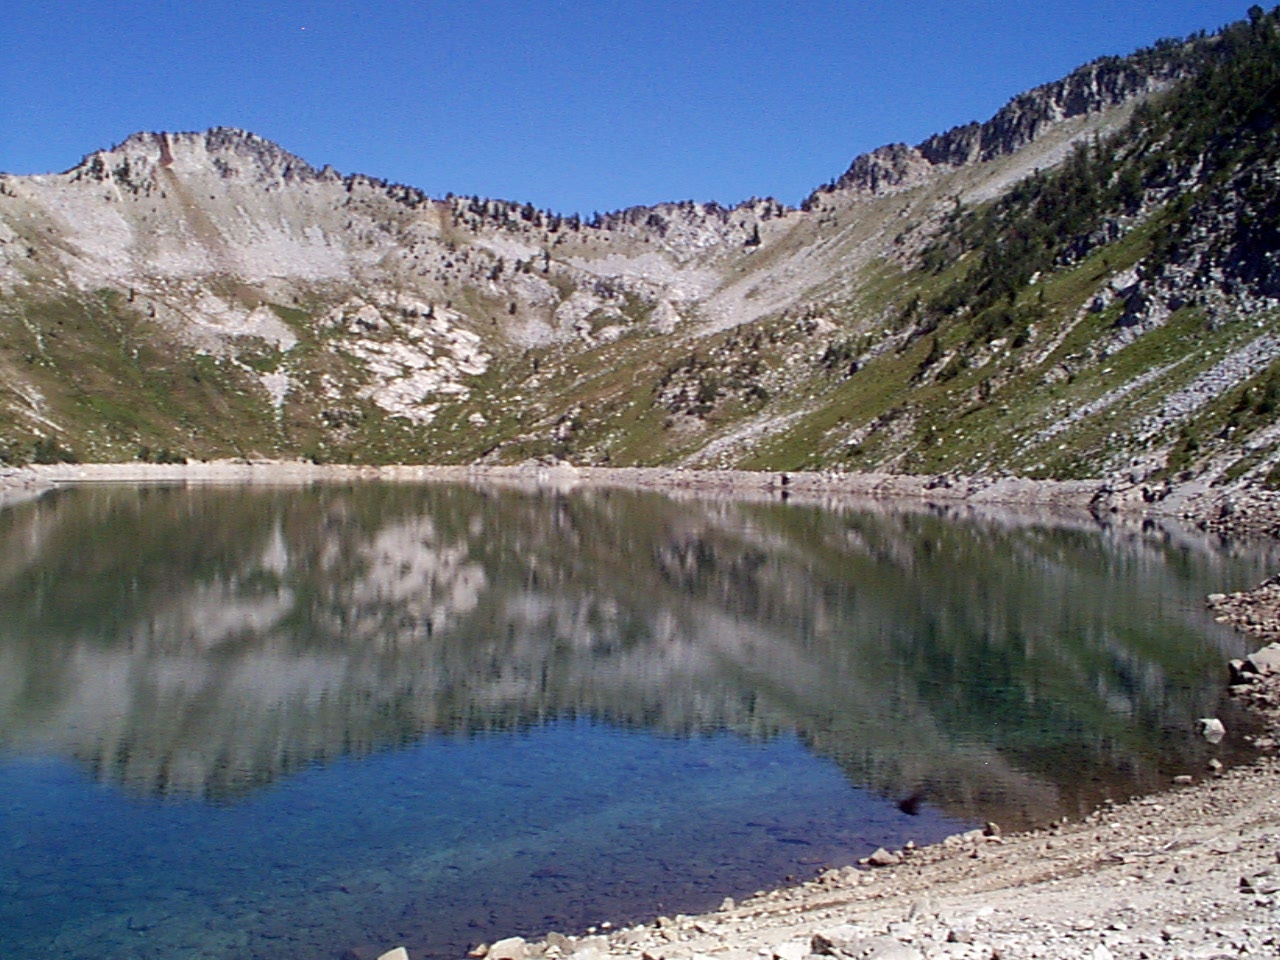 Shoreside view of Eagle Lake with rocky bare subalpine hills in background